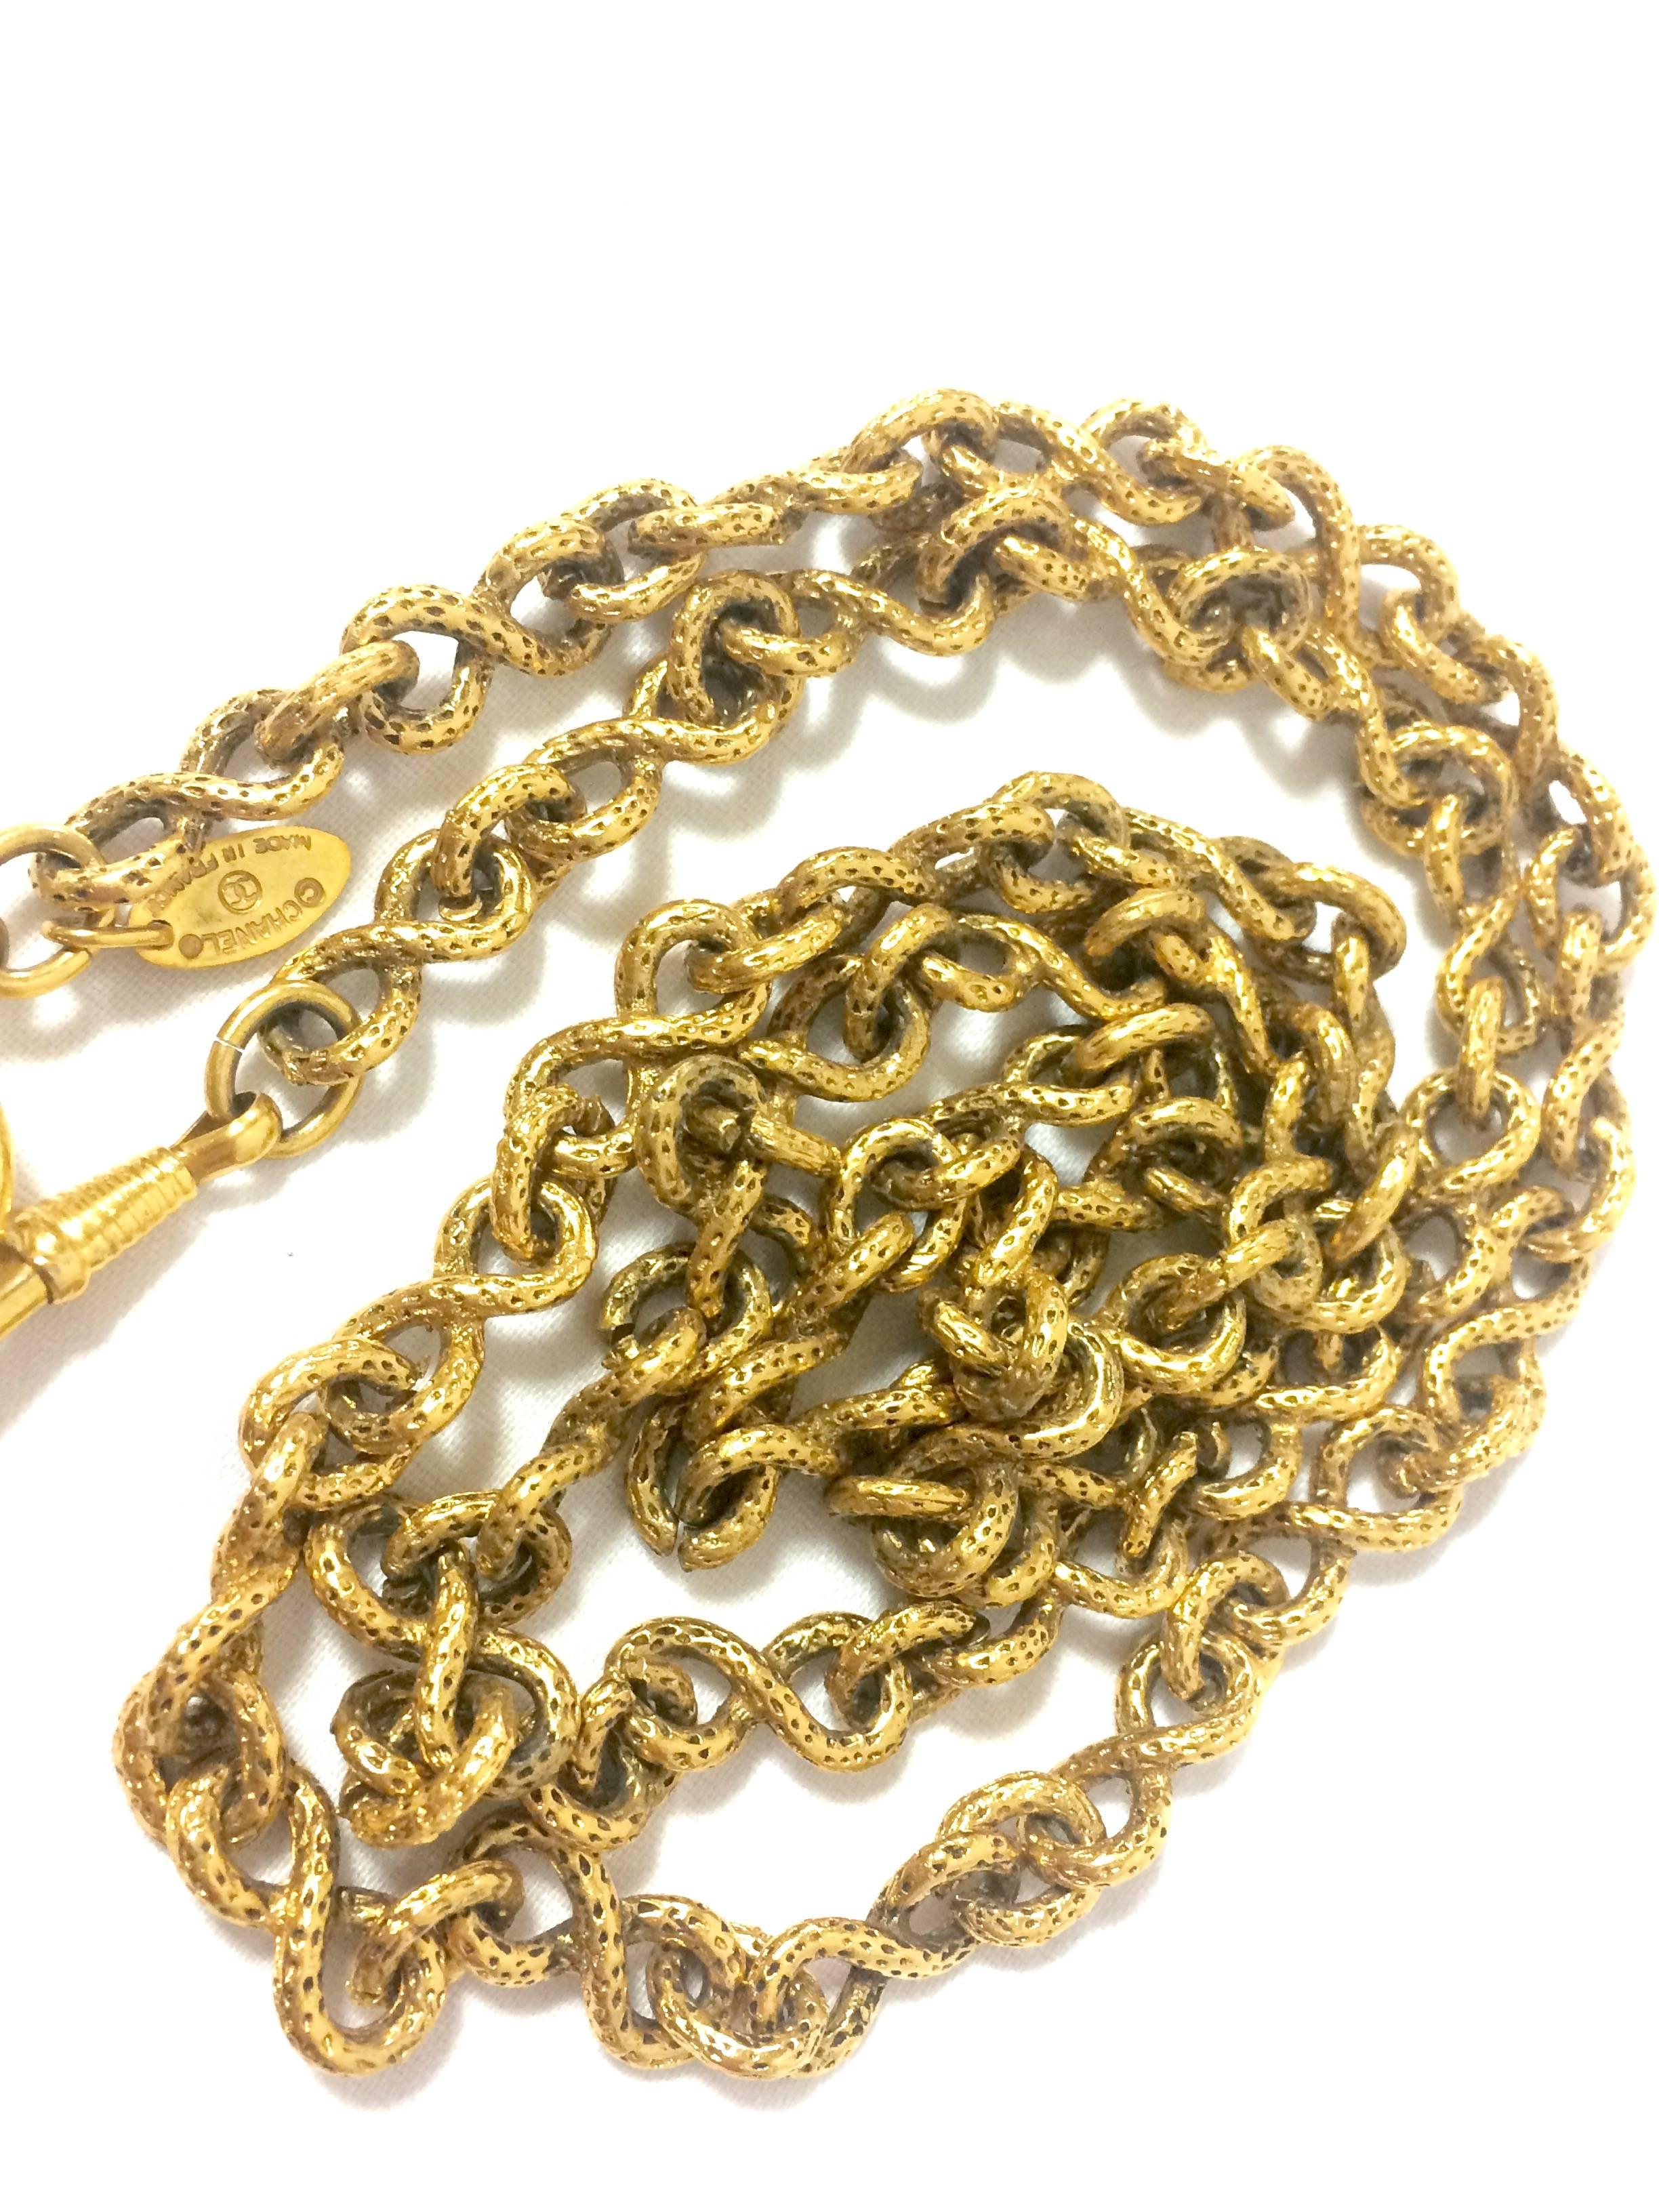 Vintage CHANEL long chain necklace with round glass loupe pendant top and CC. 2